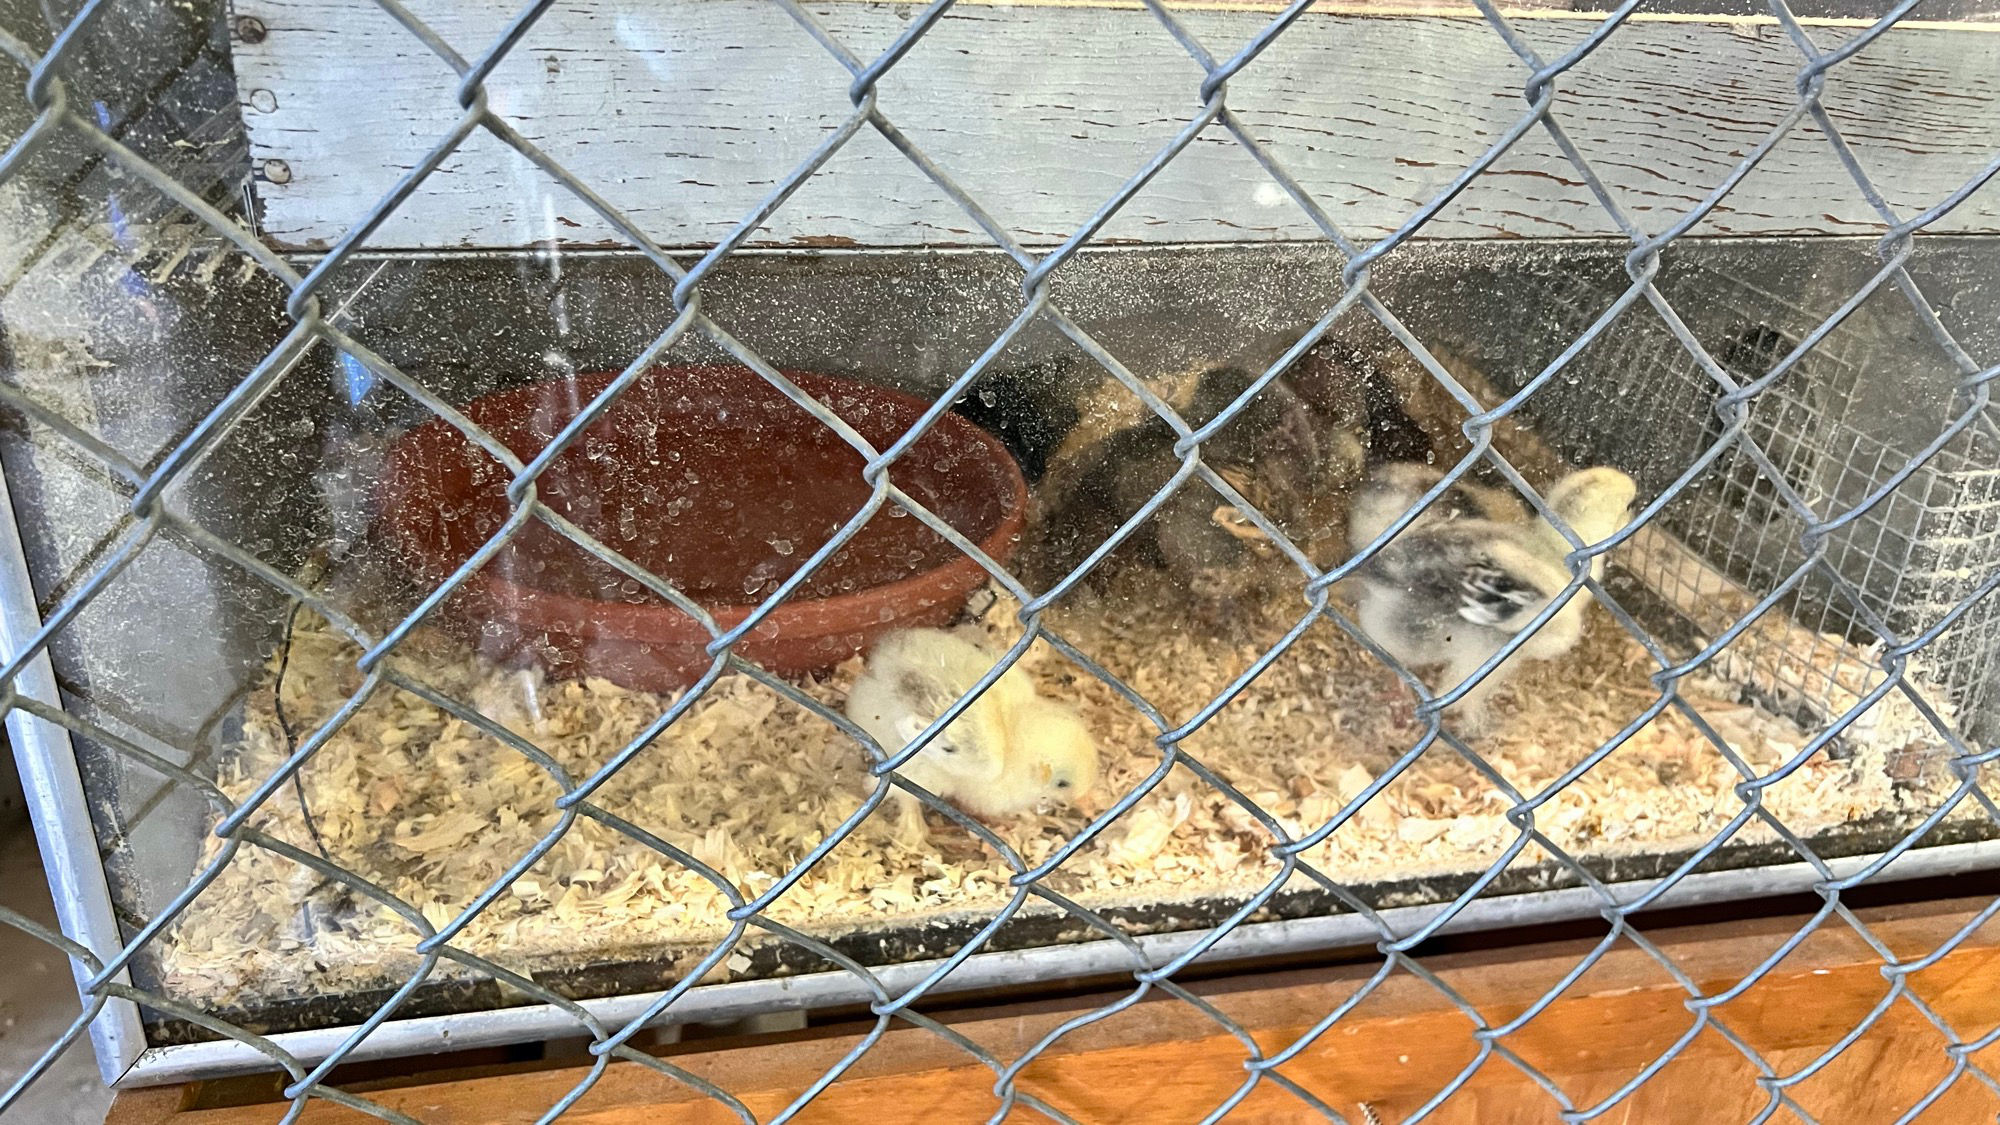 Uncle Leo's Barn Chicks